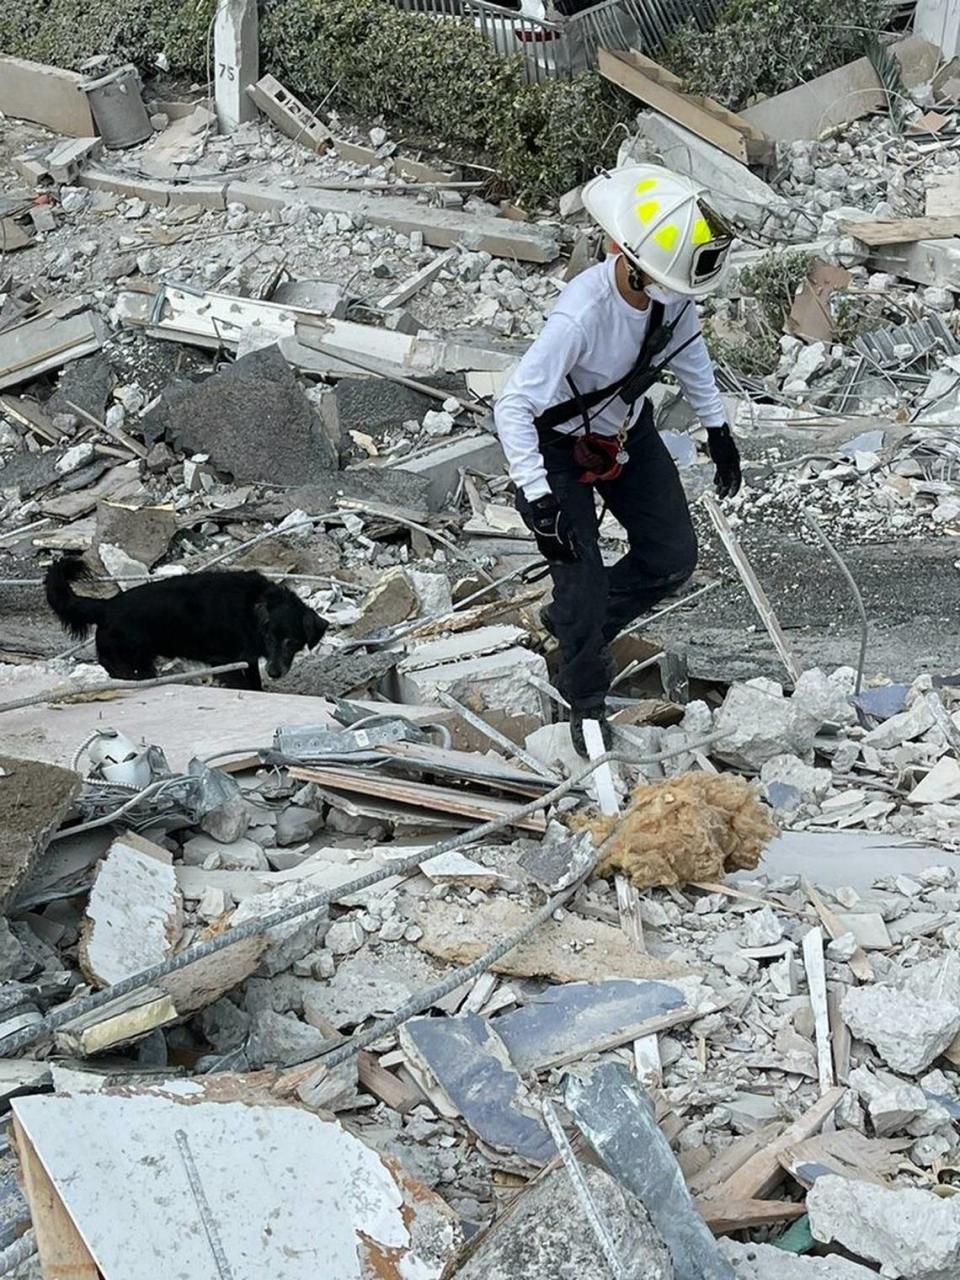 Nichole Notte, 40, and her dog, Dig, aid the search and rescue shifts at the Champlain Towers South condominium collapse.